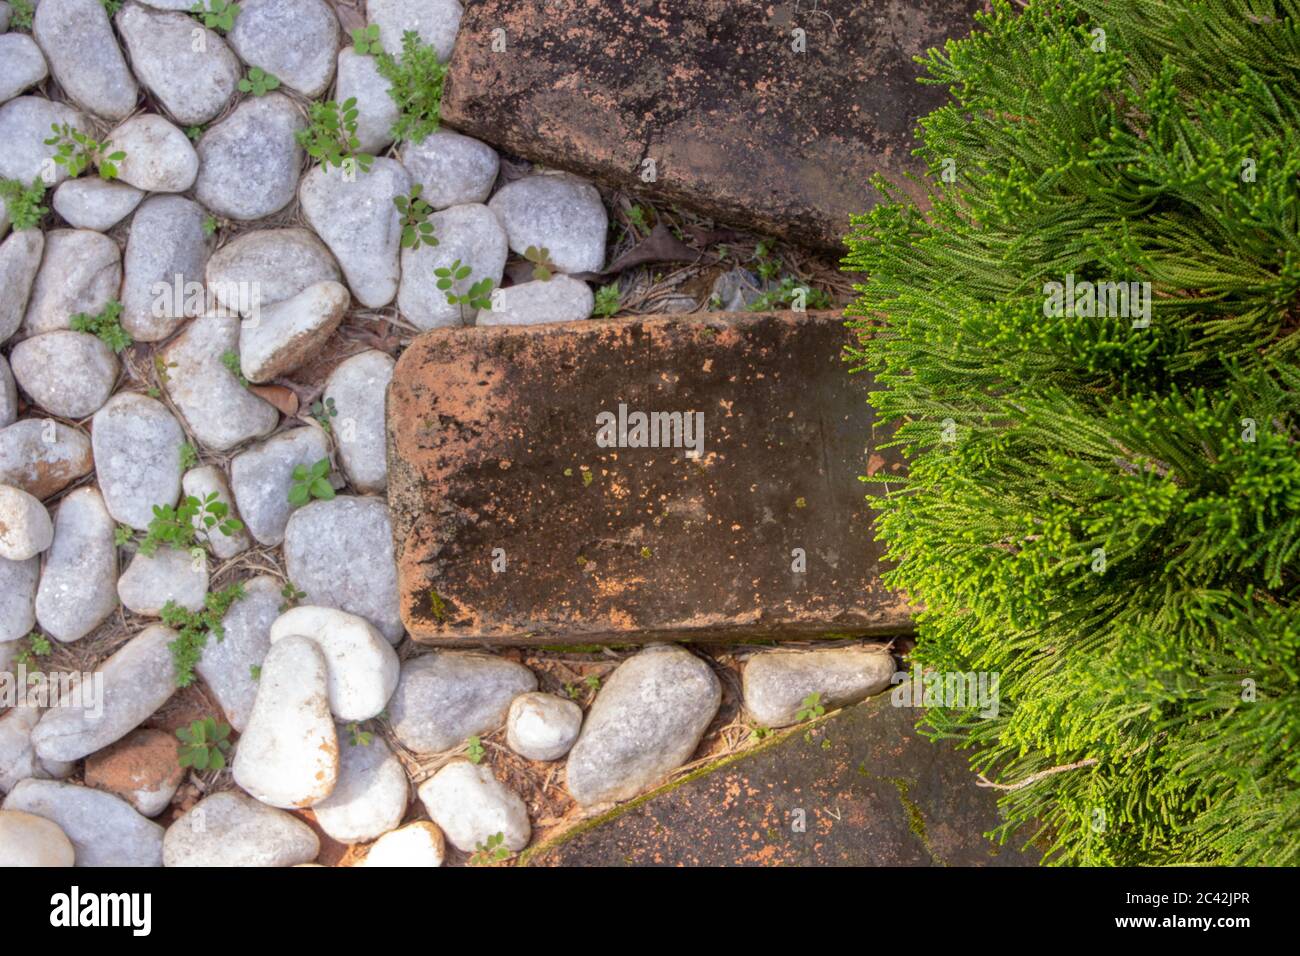 A garden decoration pattern. A pine tree surrounded by bricks with small white stones no the outside Stock Photo